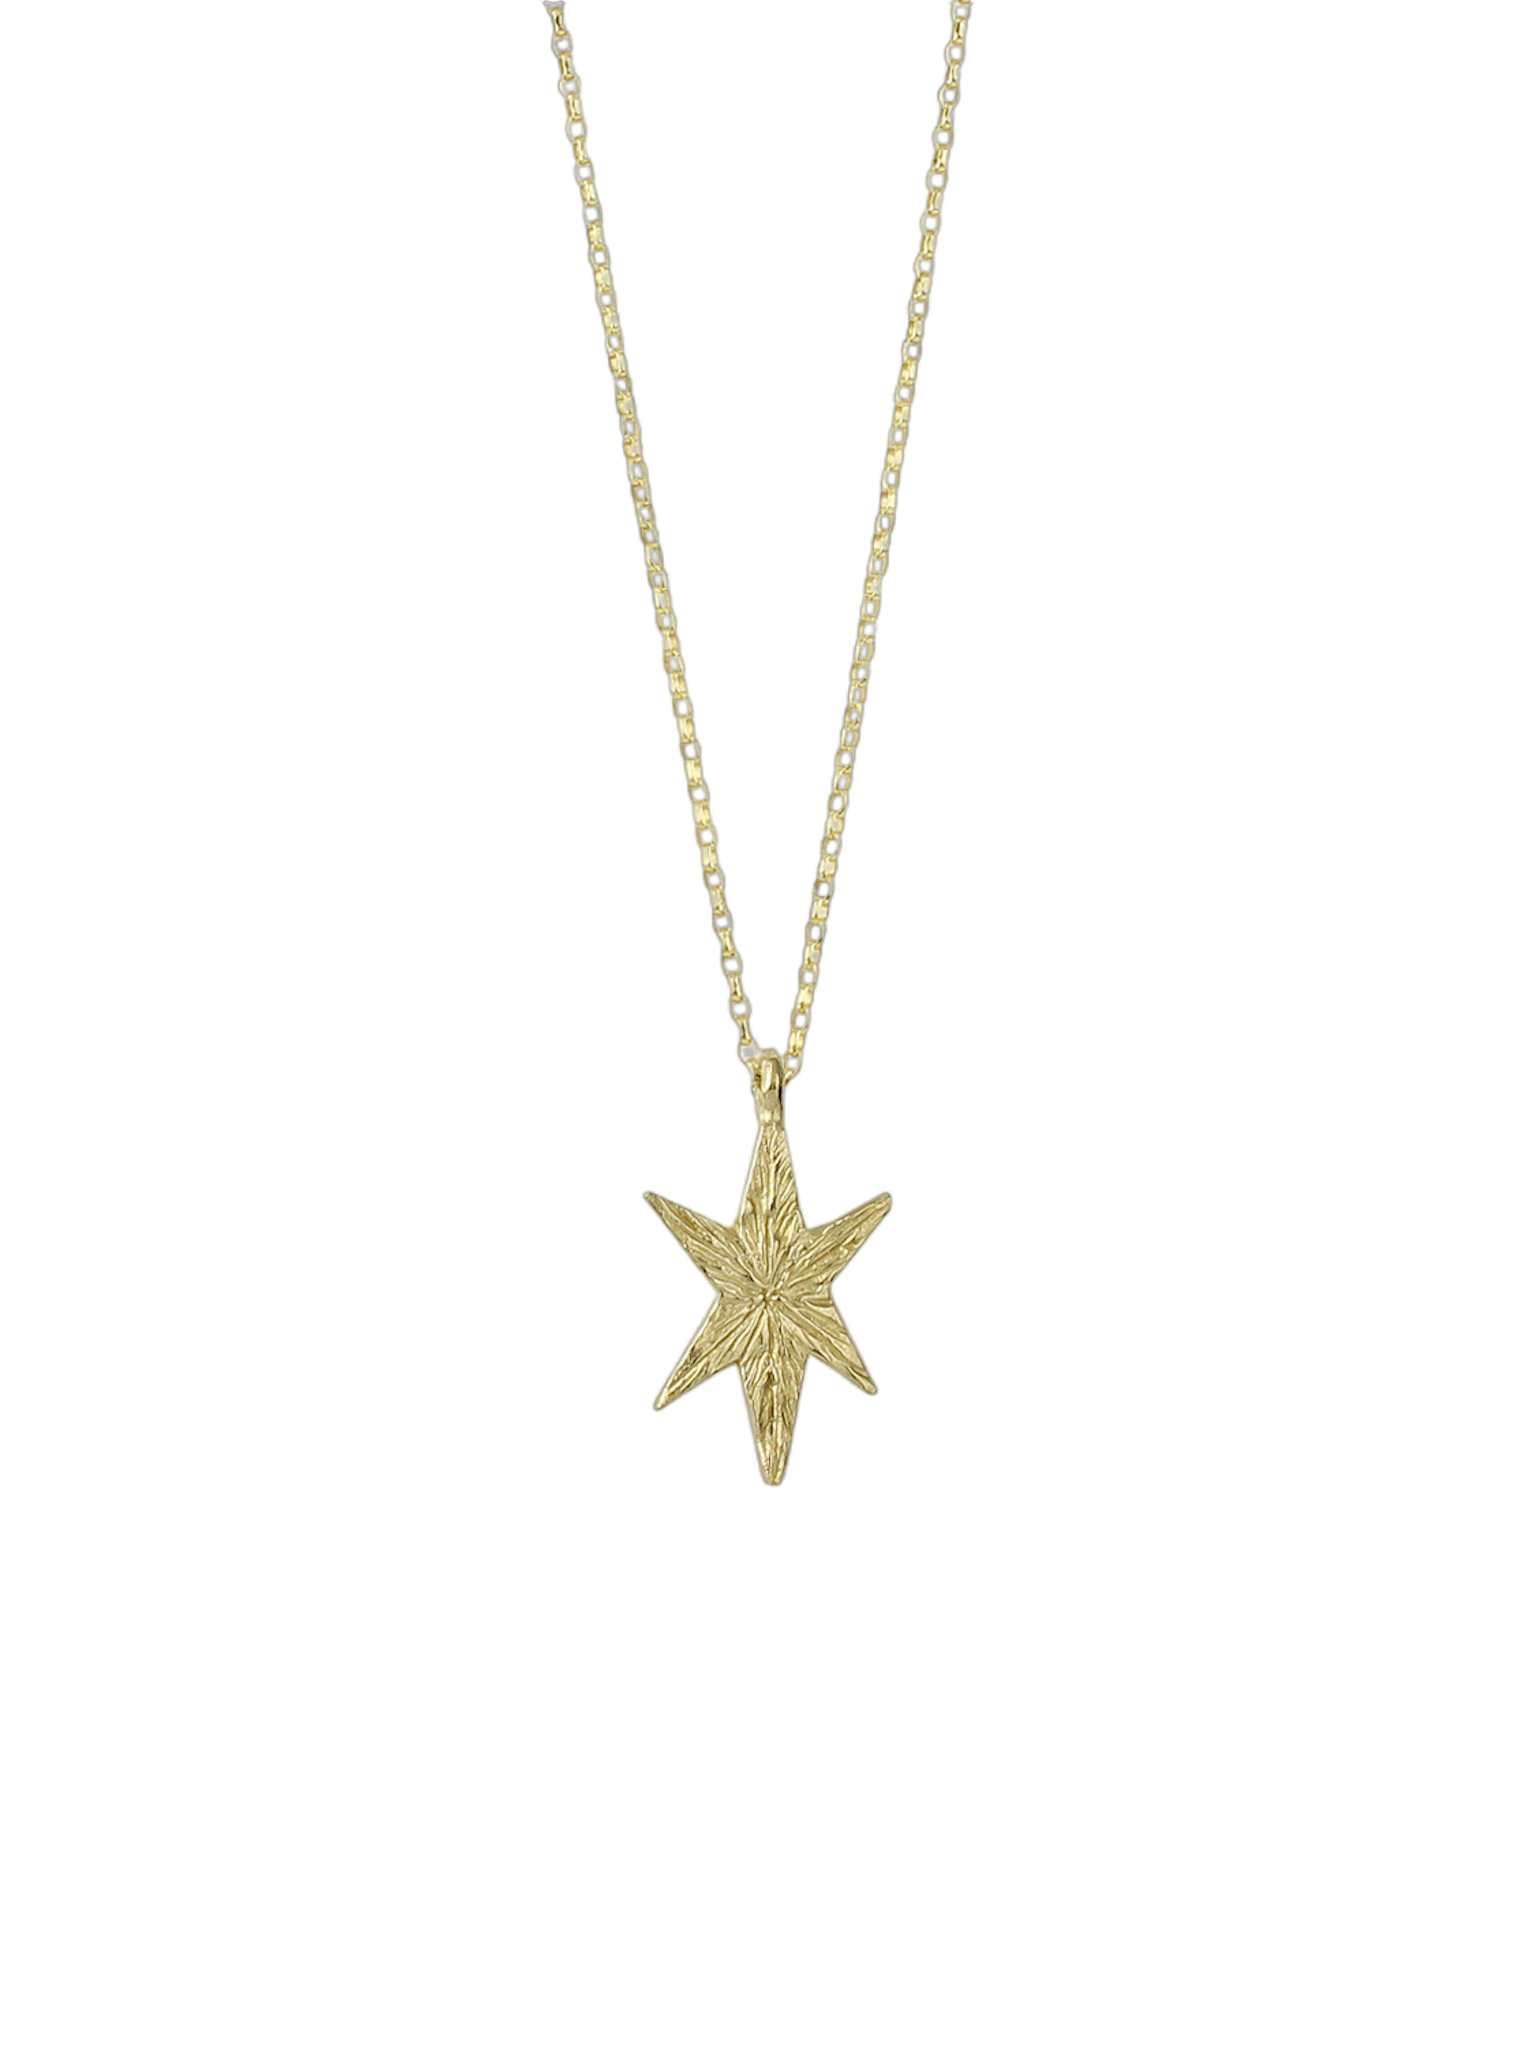 North star necklace 